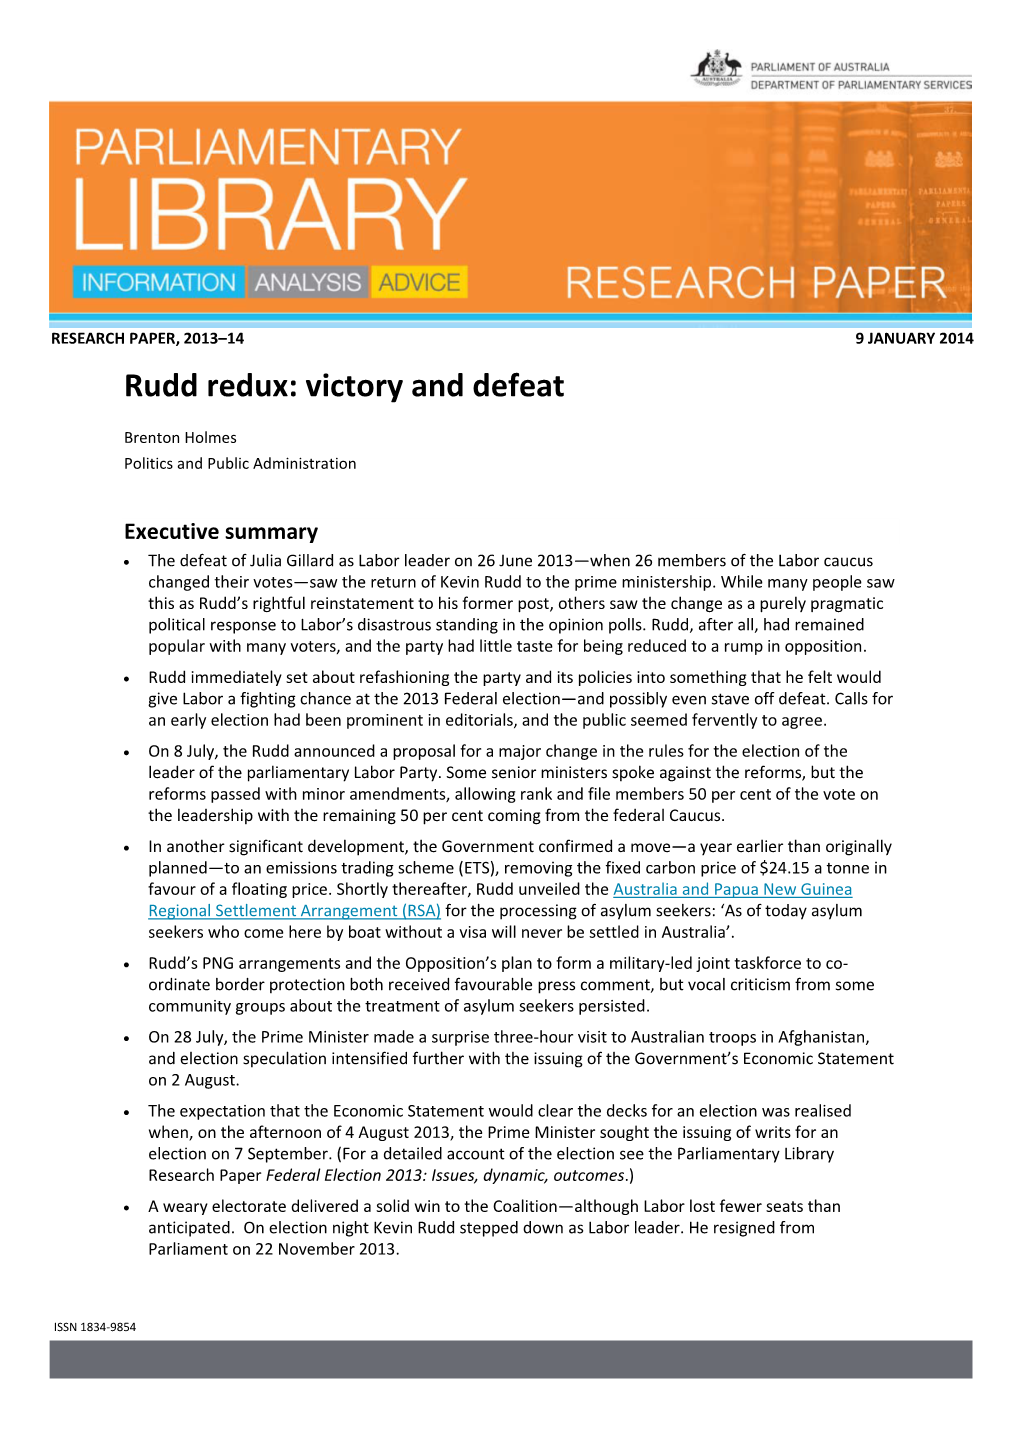 Rudd Redux: Victory and Defeat